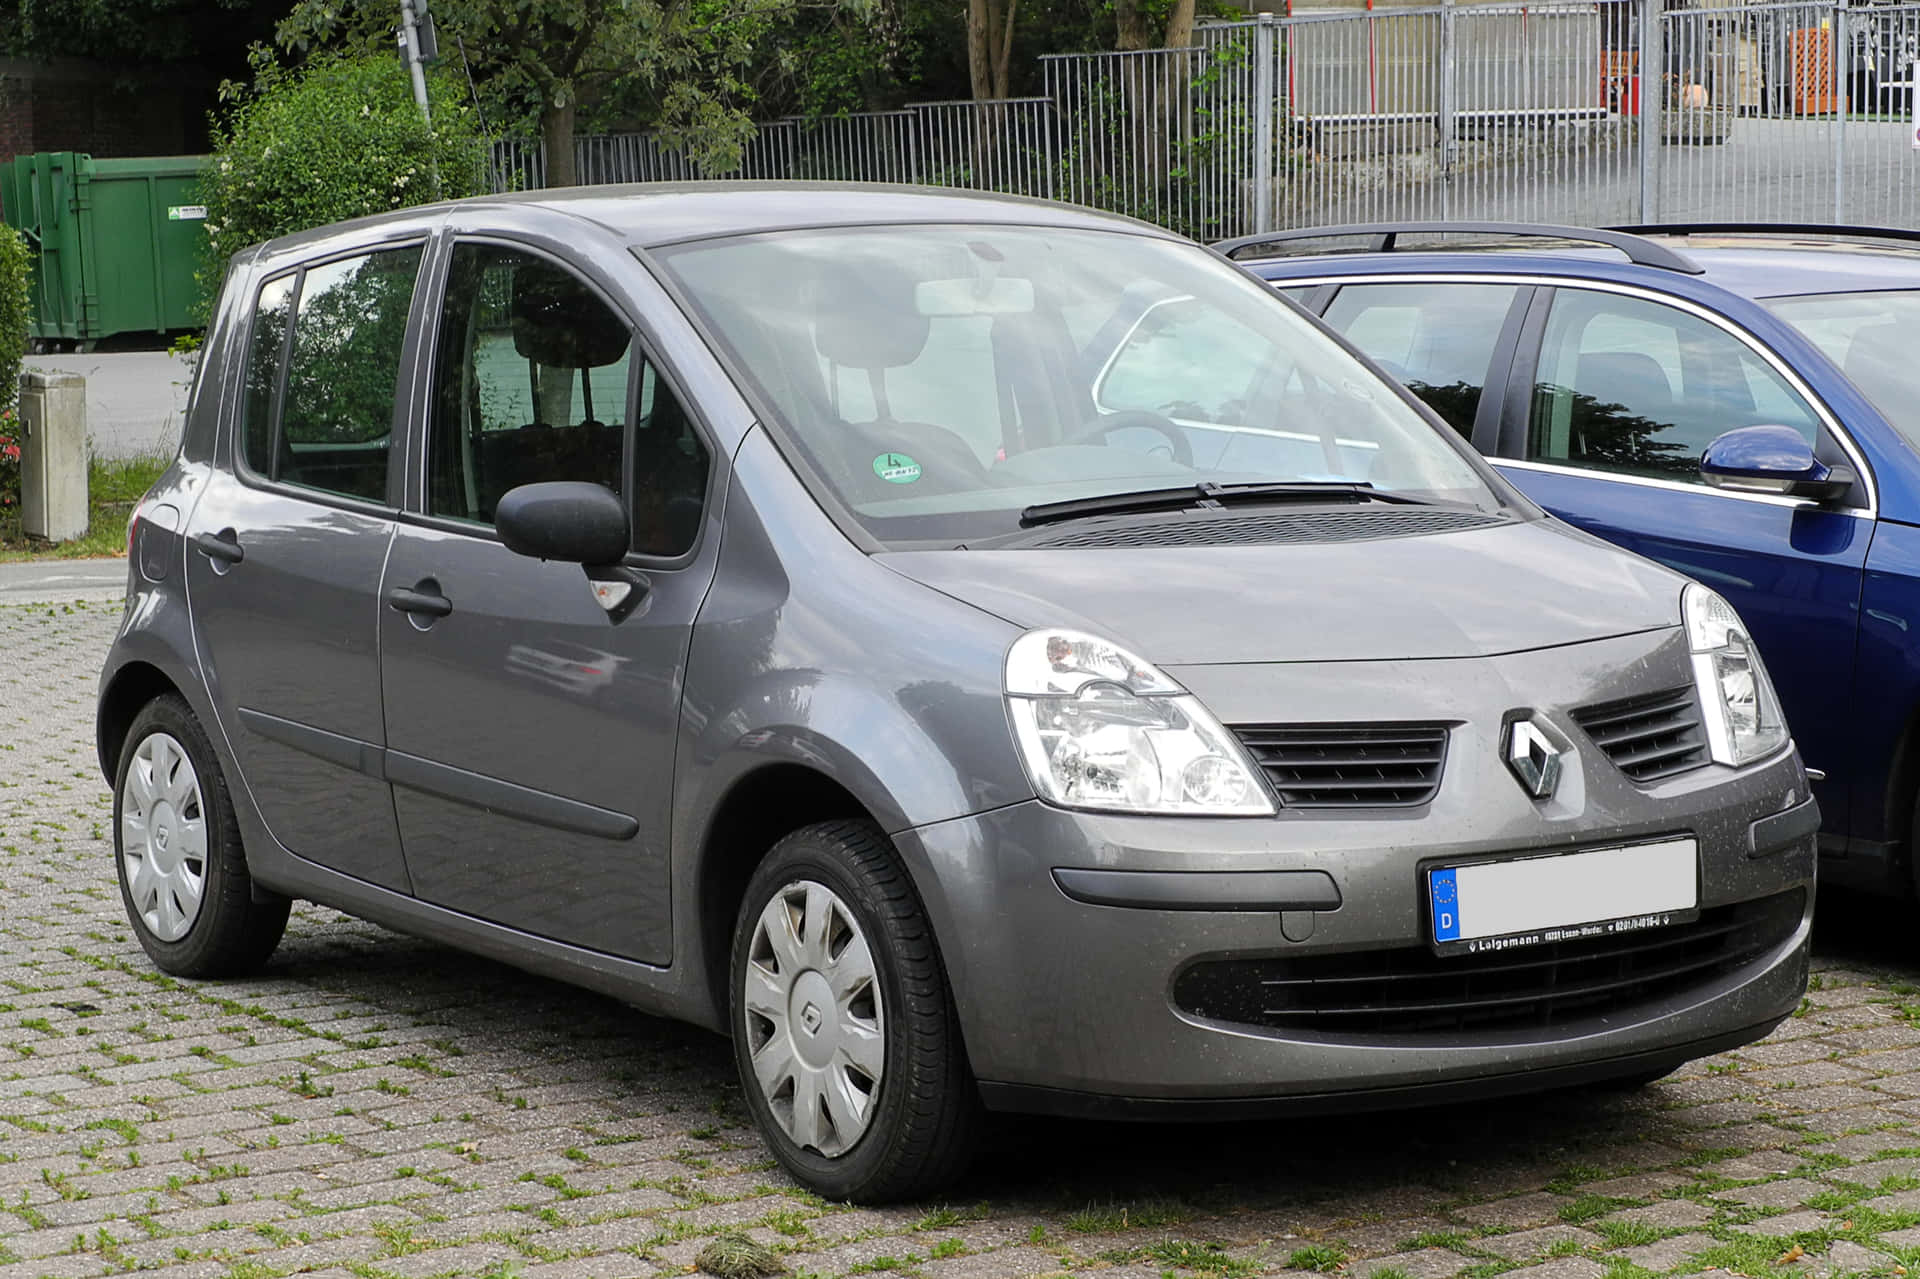 Caption: Sleek and Stylish Renault Modus in Action Wallpaper